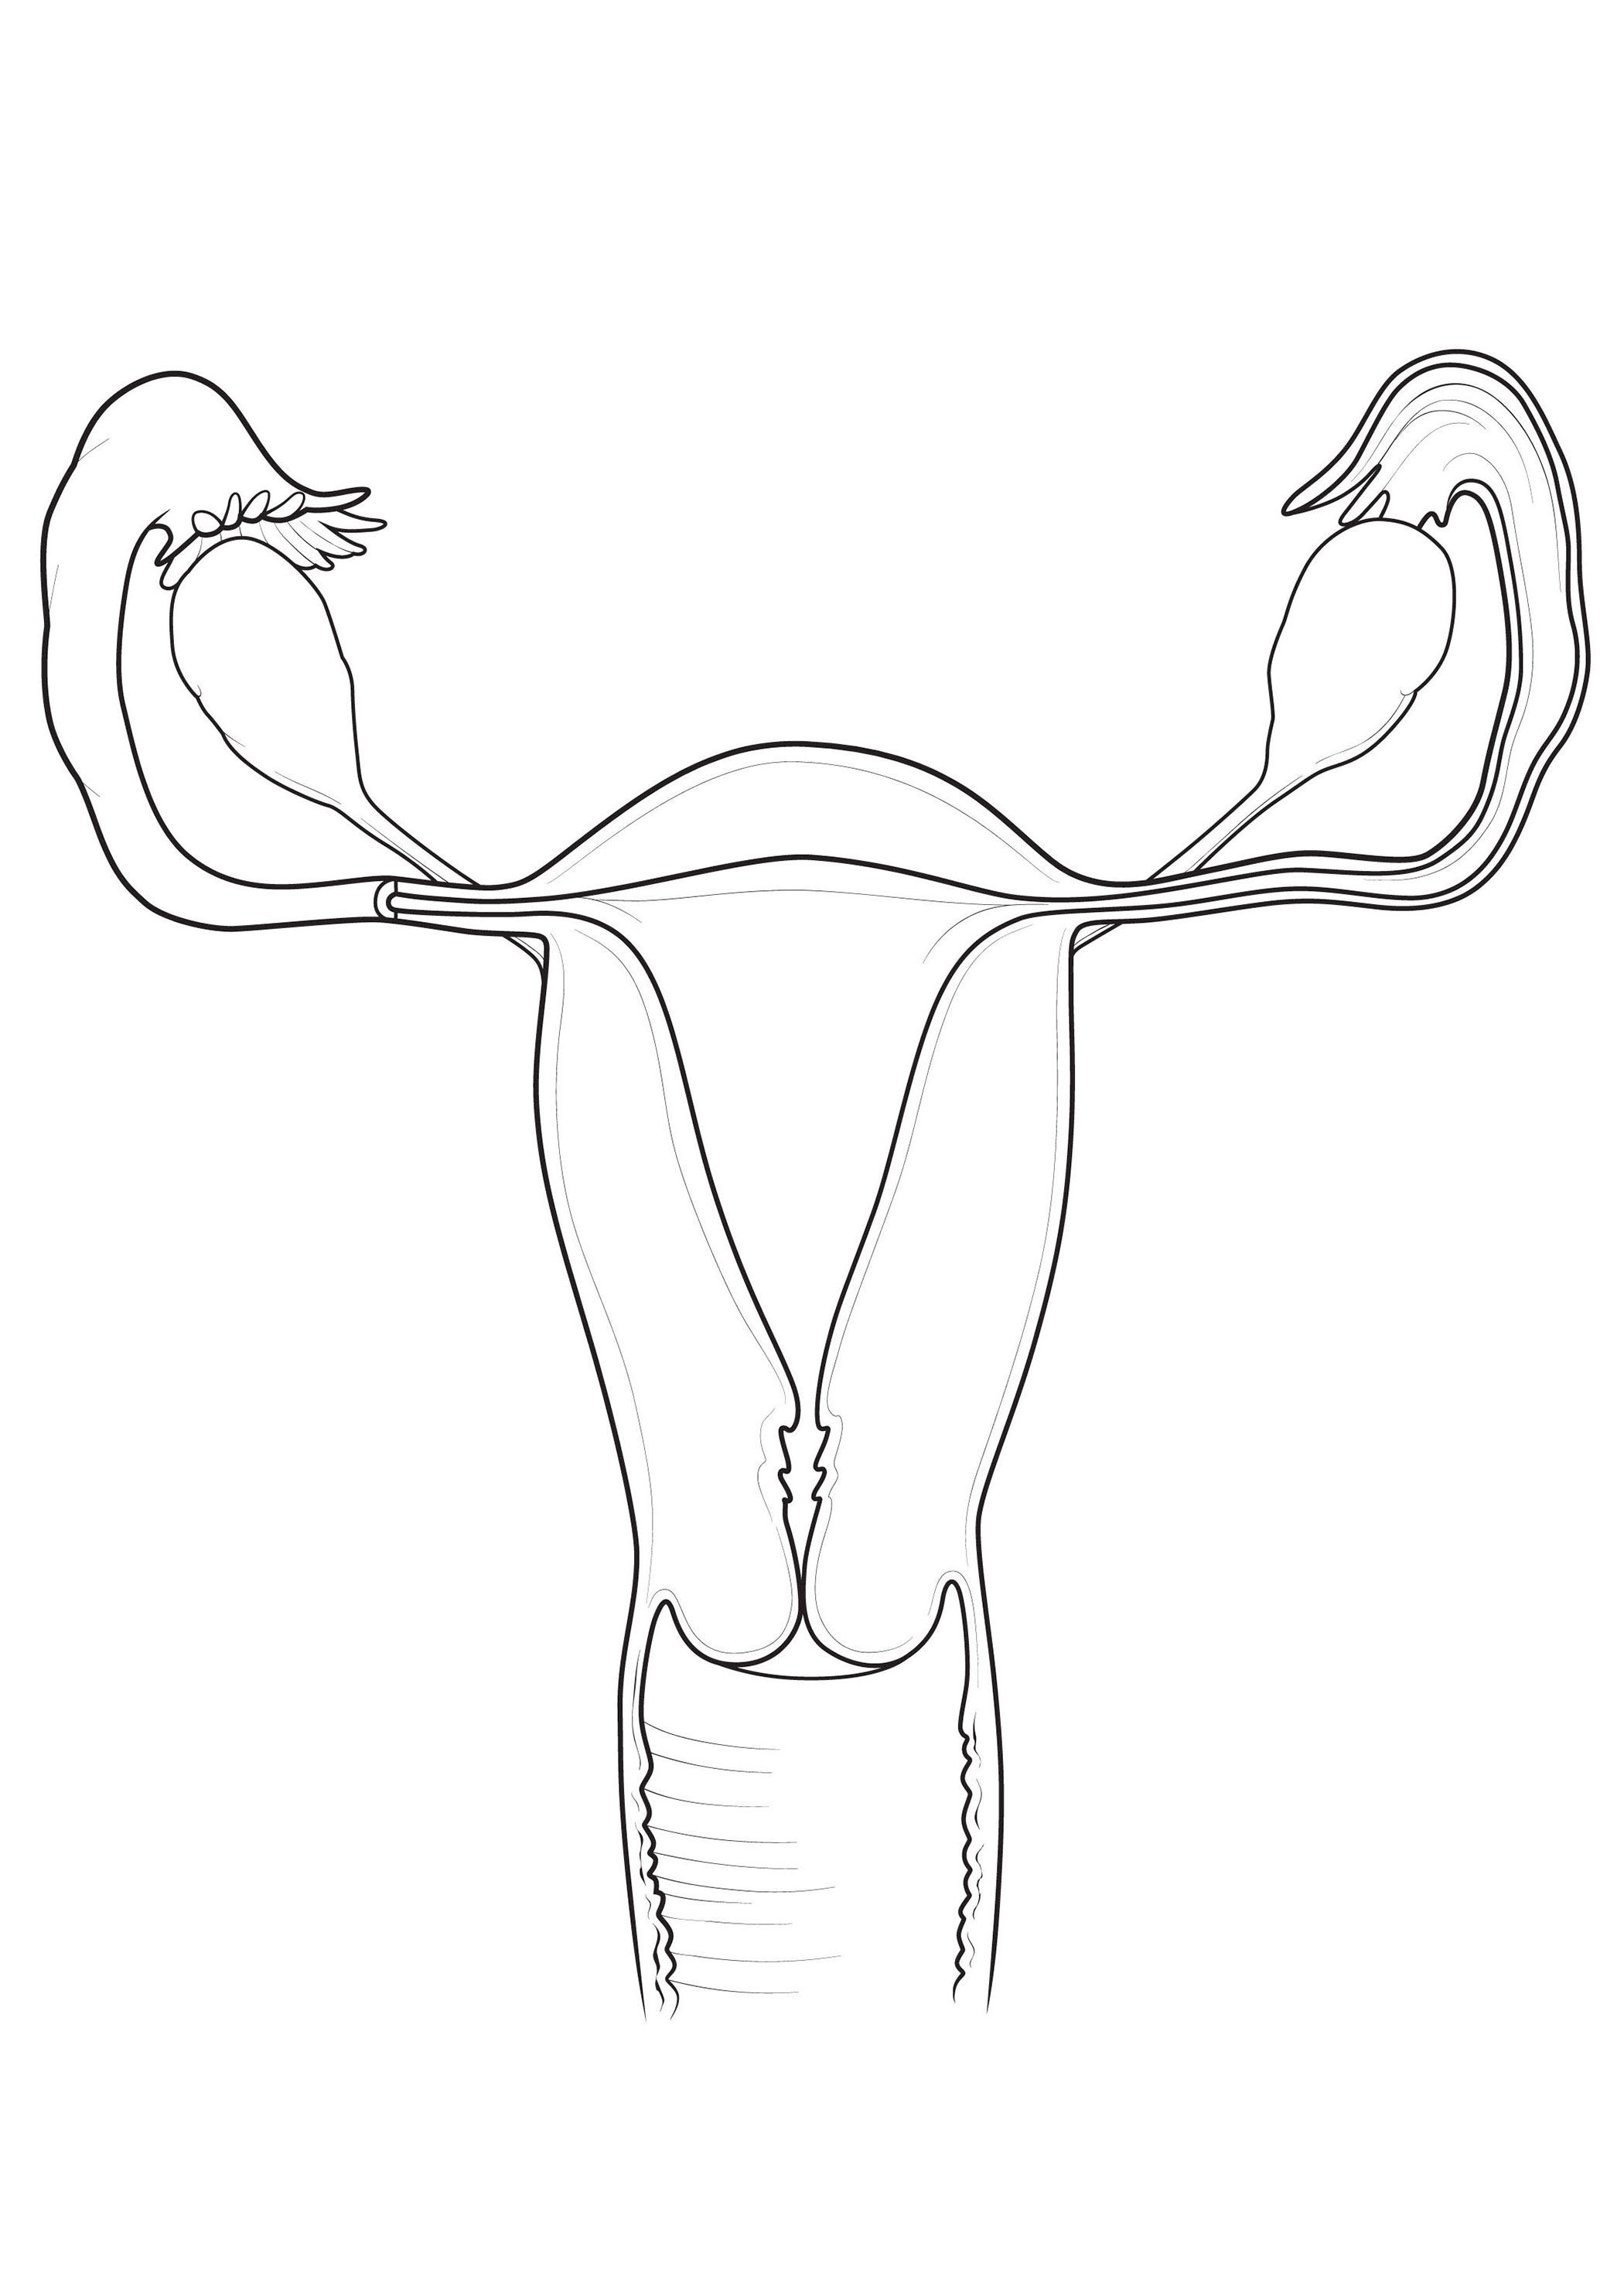 Blank Diagram Of Human Reproductive Systems Filehuman Male